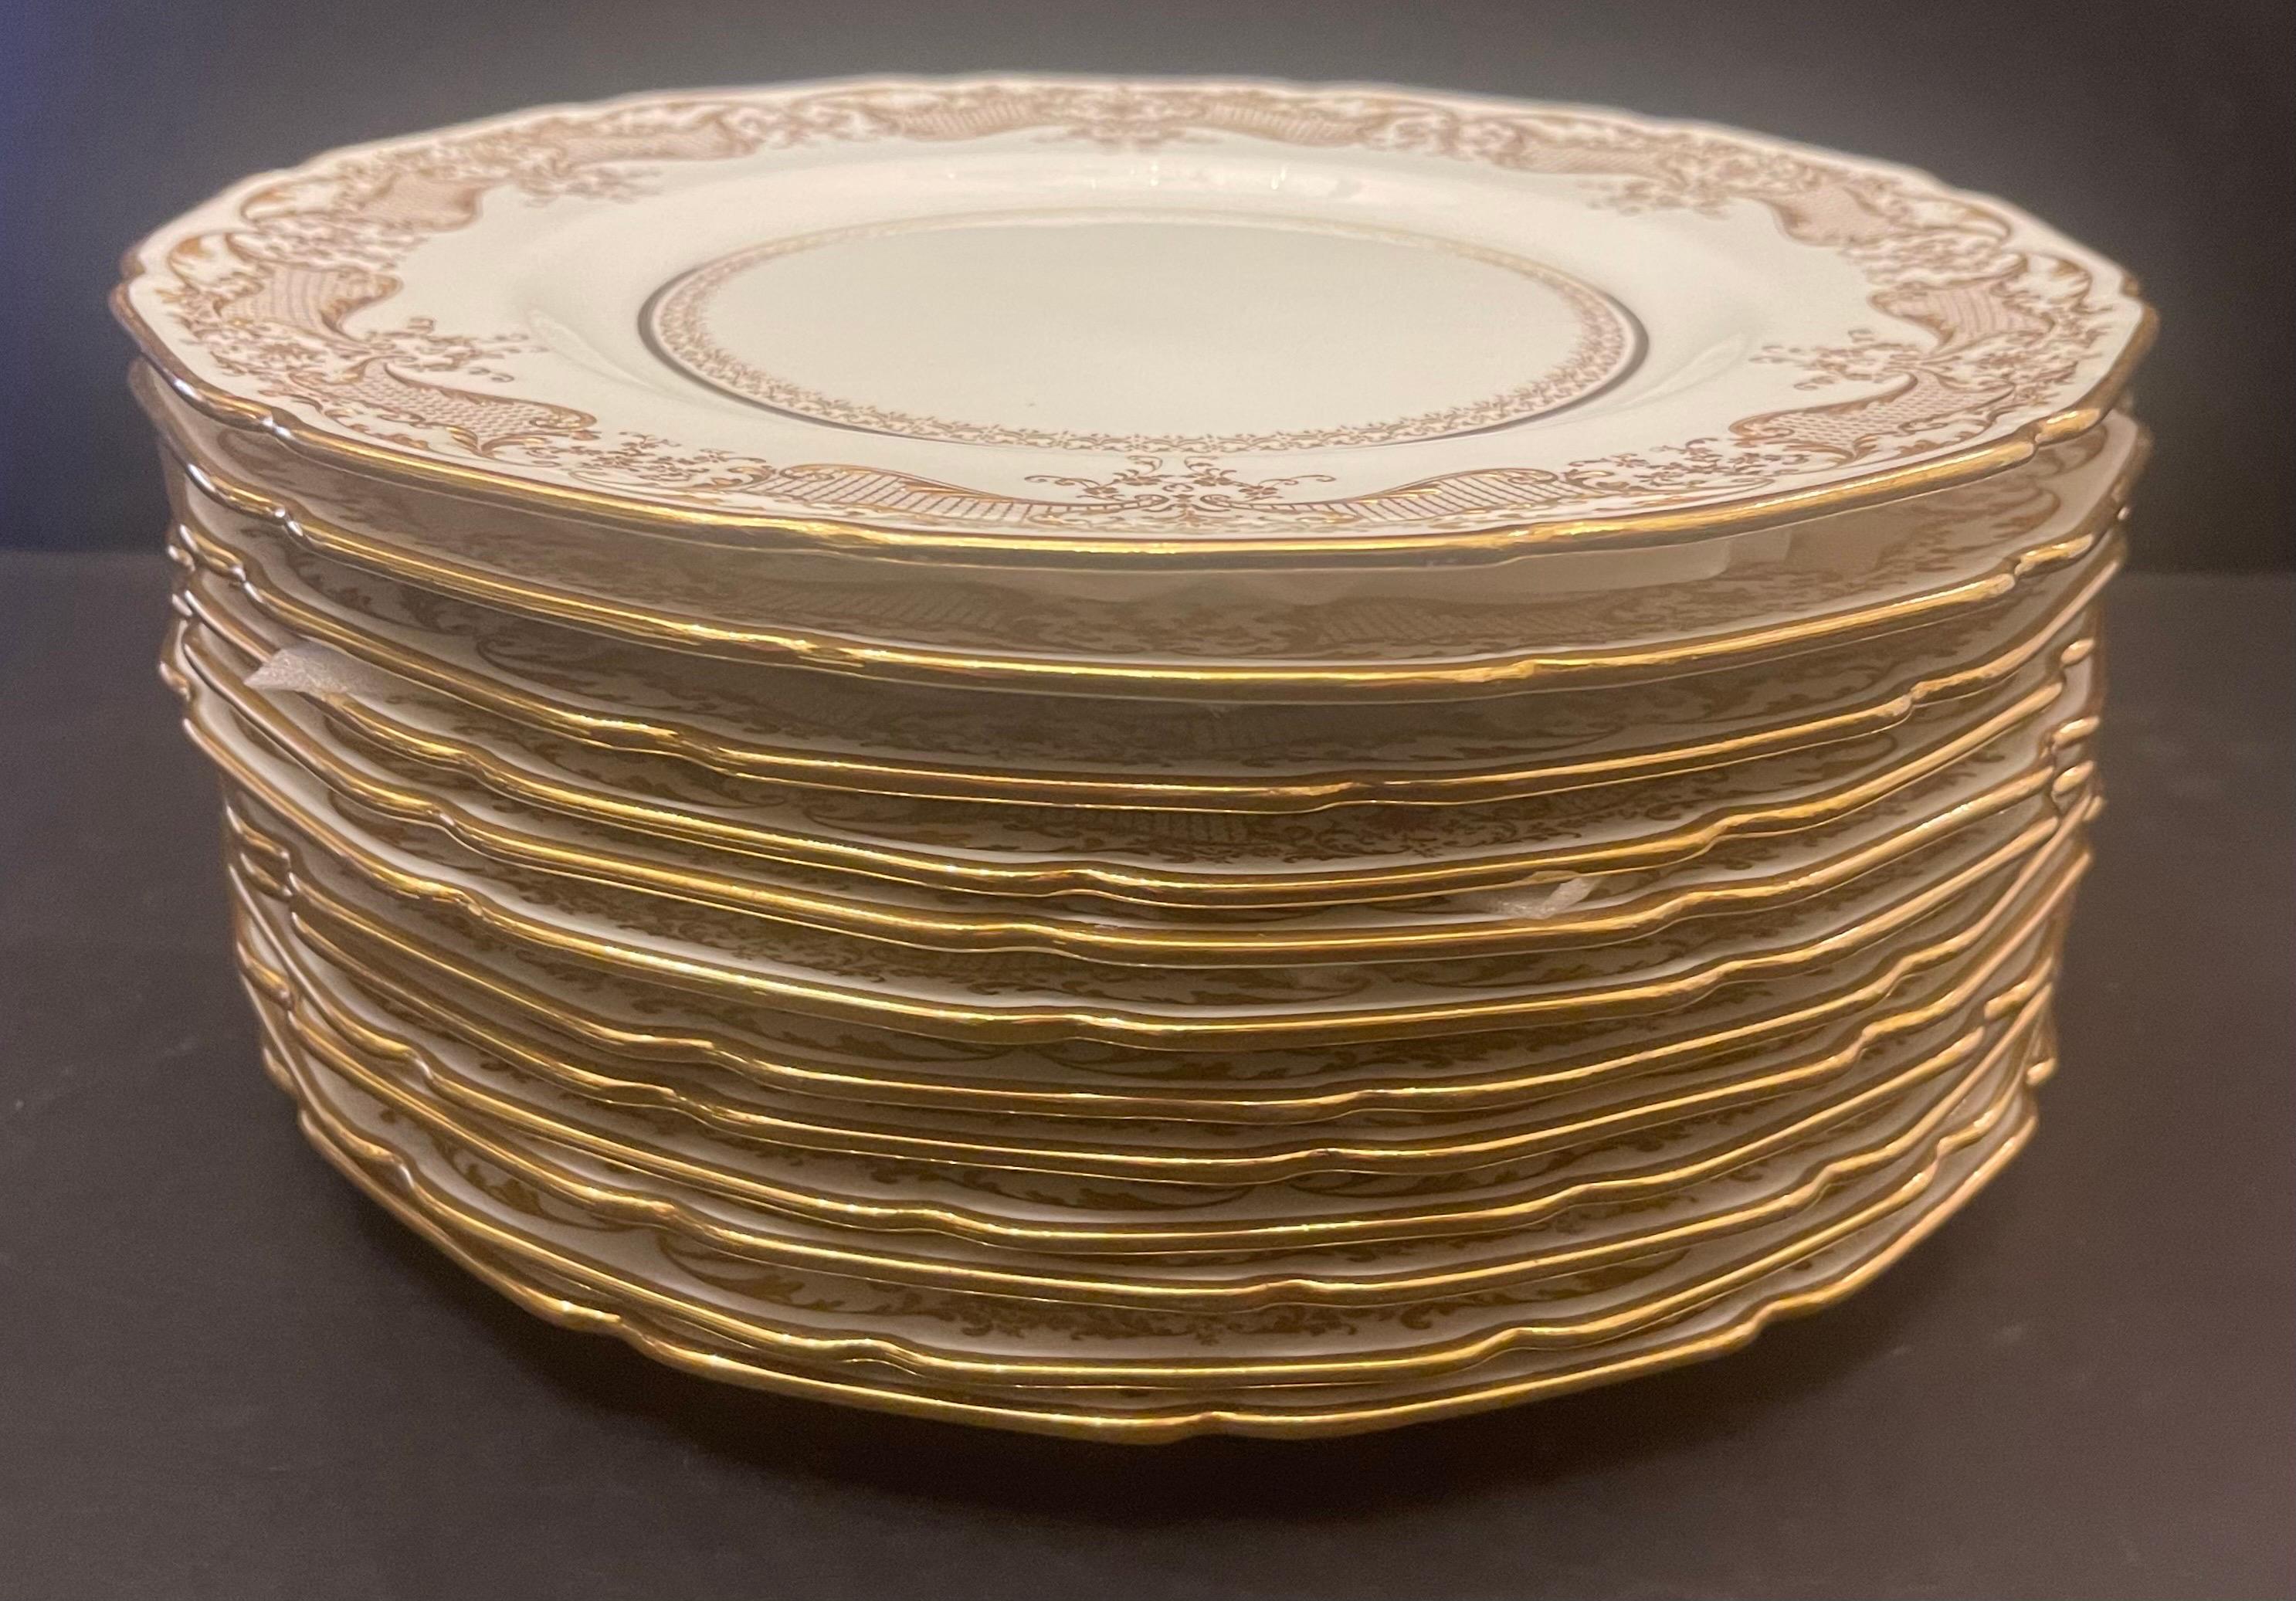 A Wonderful Service Of Royal Doulton 12 Antique English Raised Gold Gilt Encrusted Service / Dinner Plates. 
Stamped Royal Doulton England On The Back Of Each Plate.